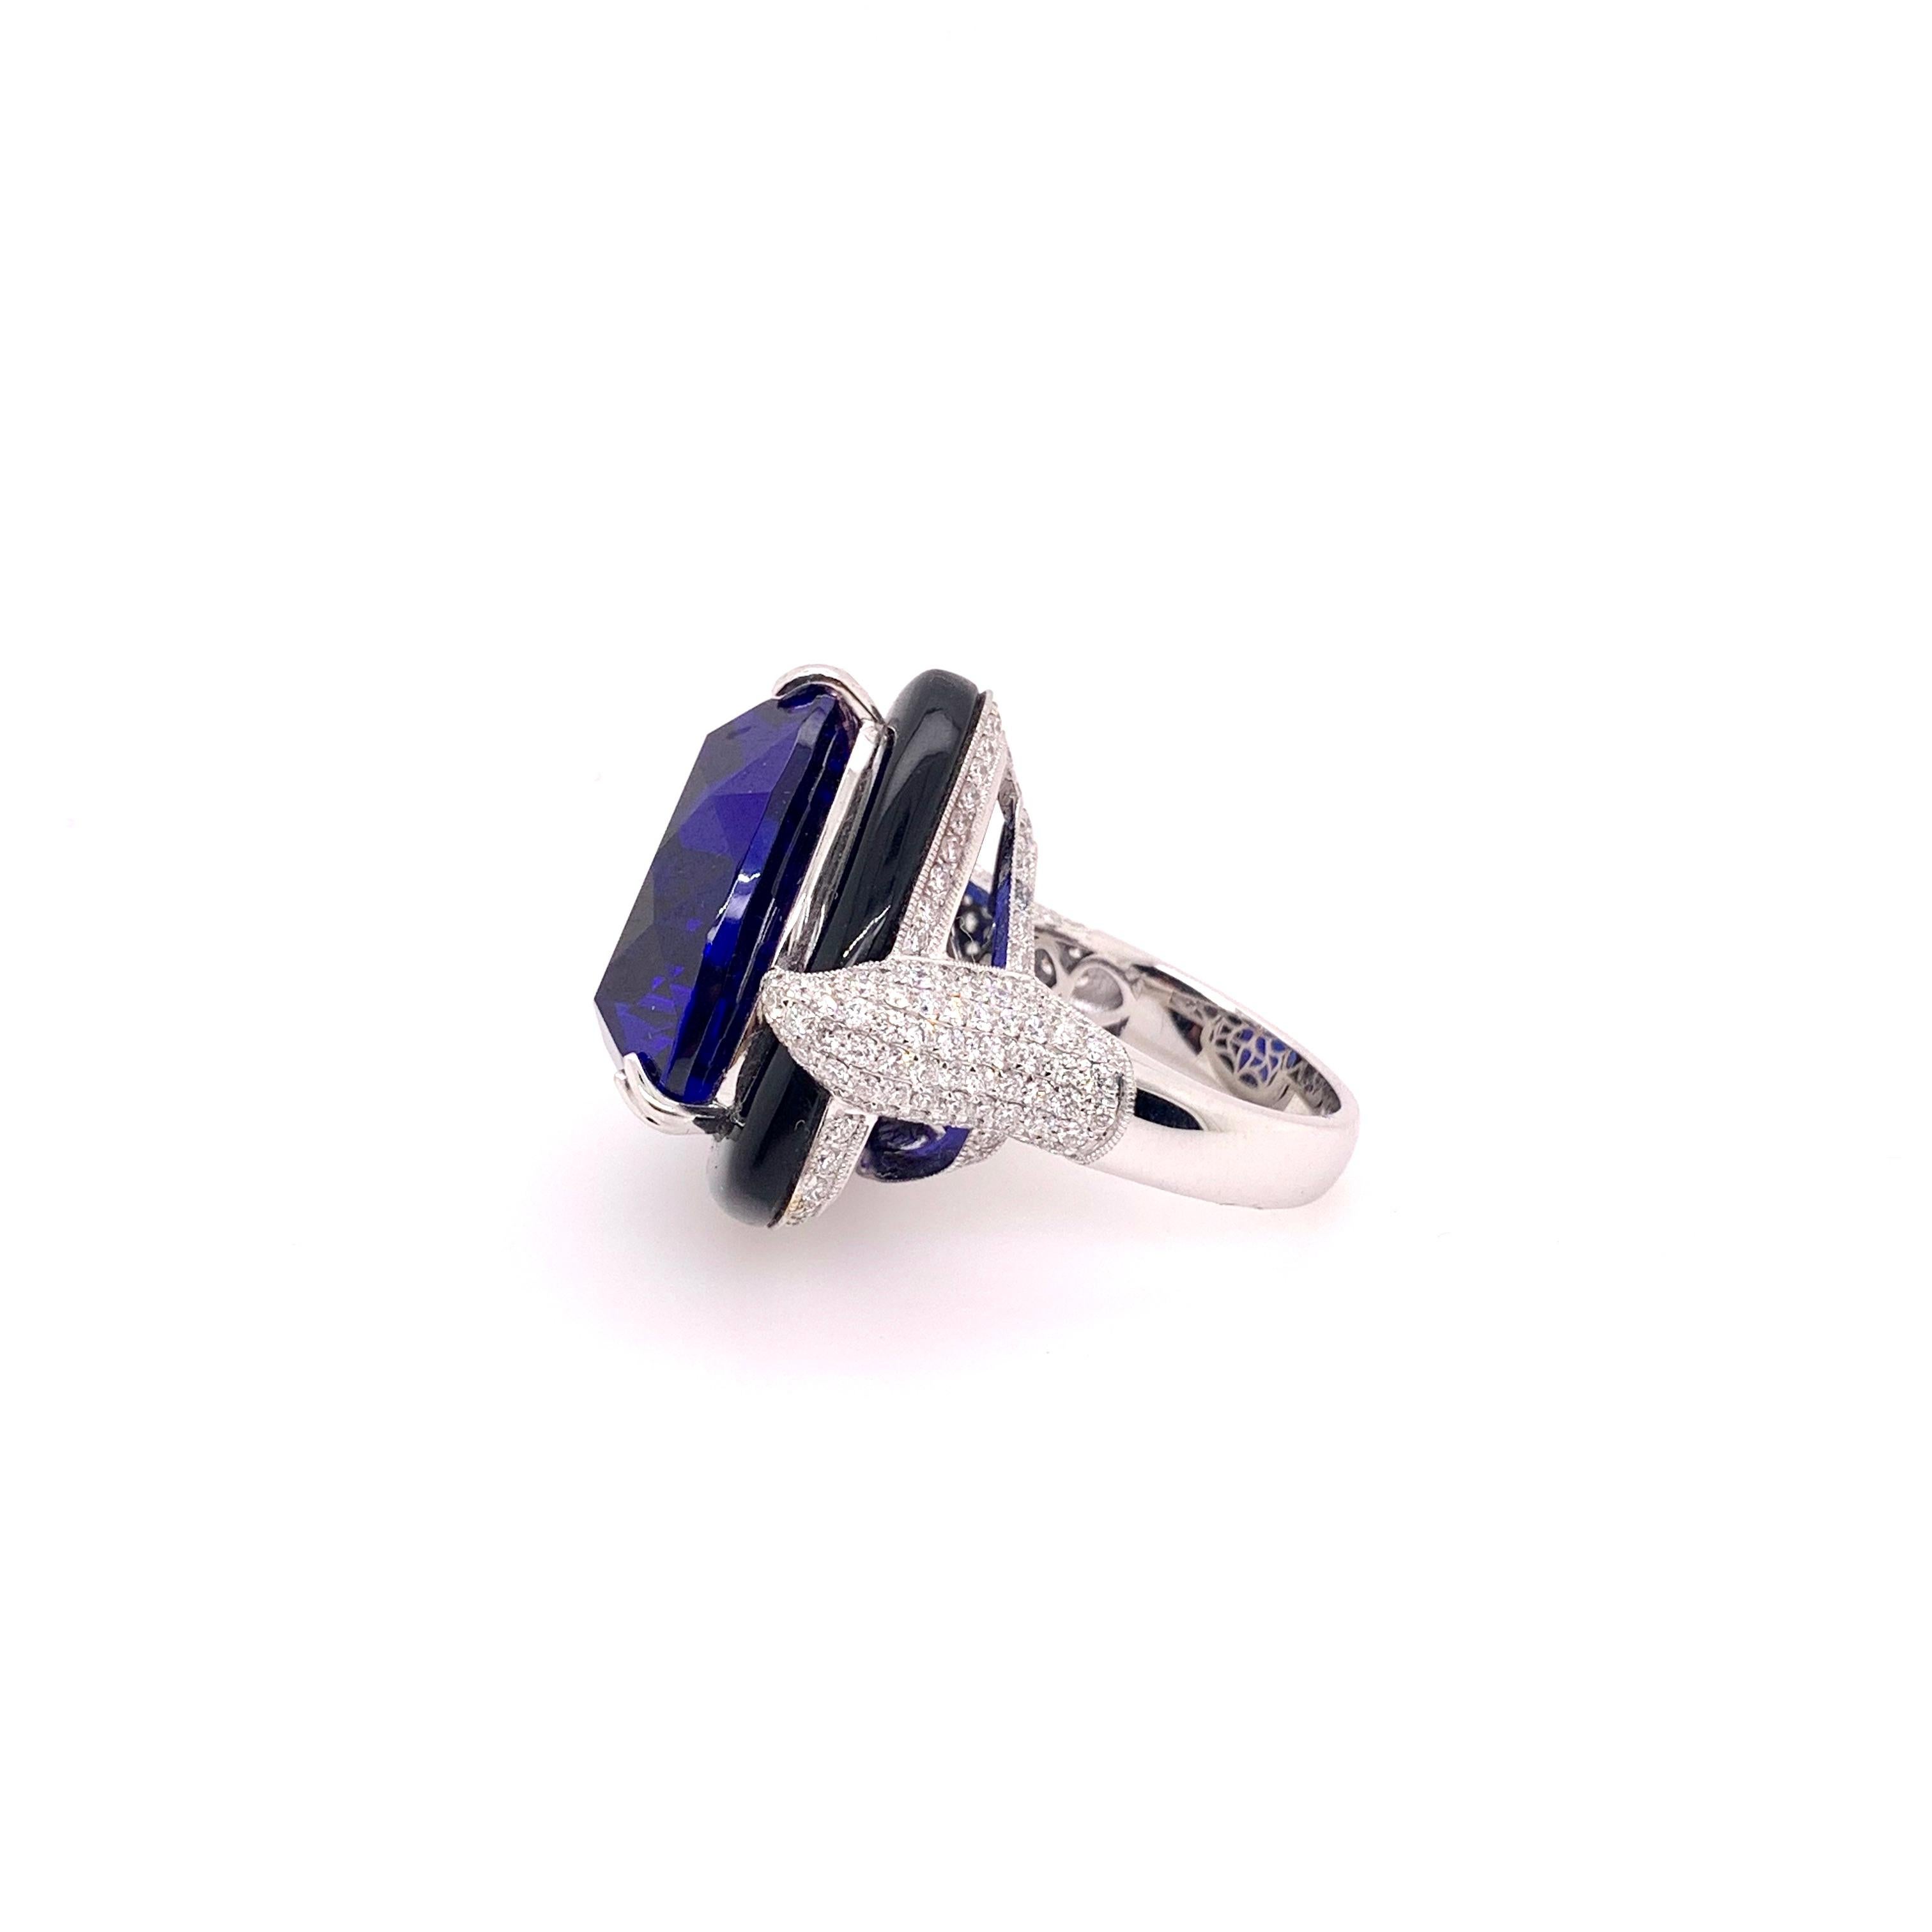 A masterpiece that will grasp everyone's attention!  18k White gold handmade tanzanite ring with custom cut onyx on the border and diamonds all around the setting.   The gigantic 41.5 ct. tanzanite is an unusual trillion cut that glistens at every